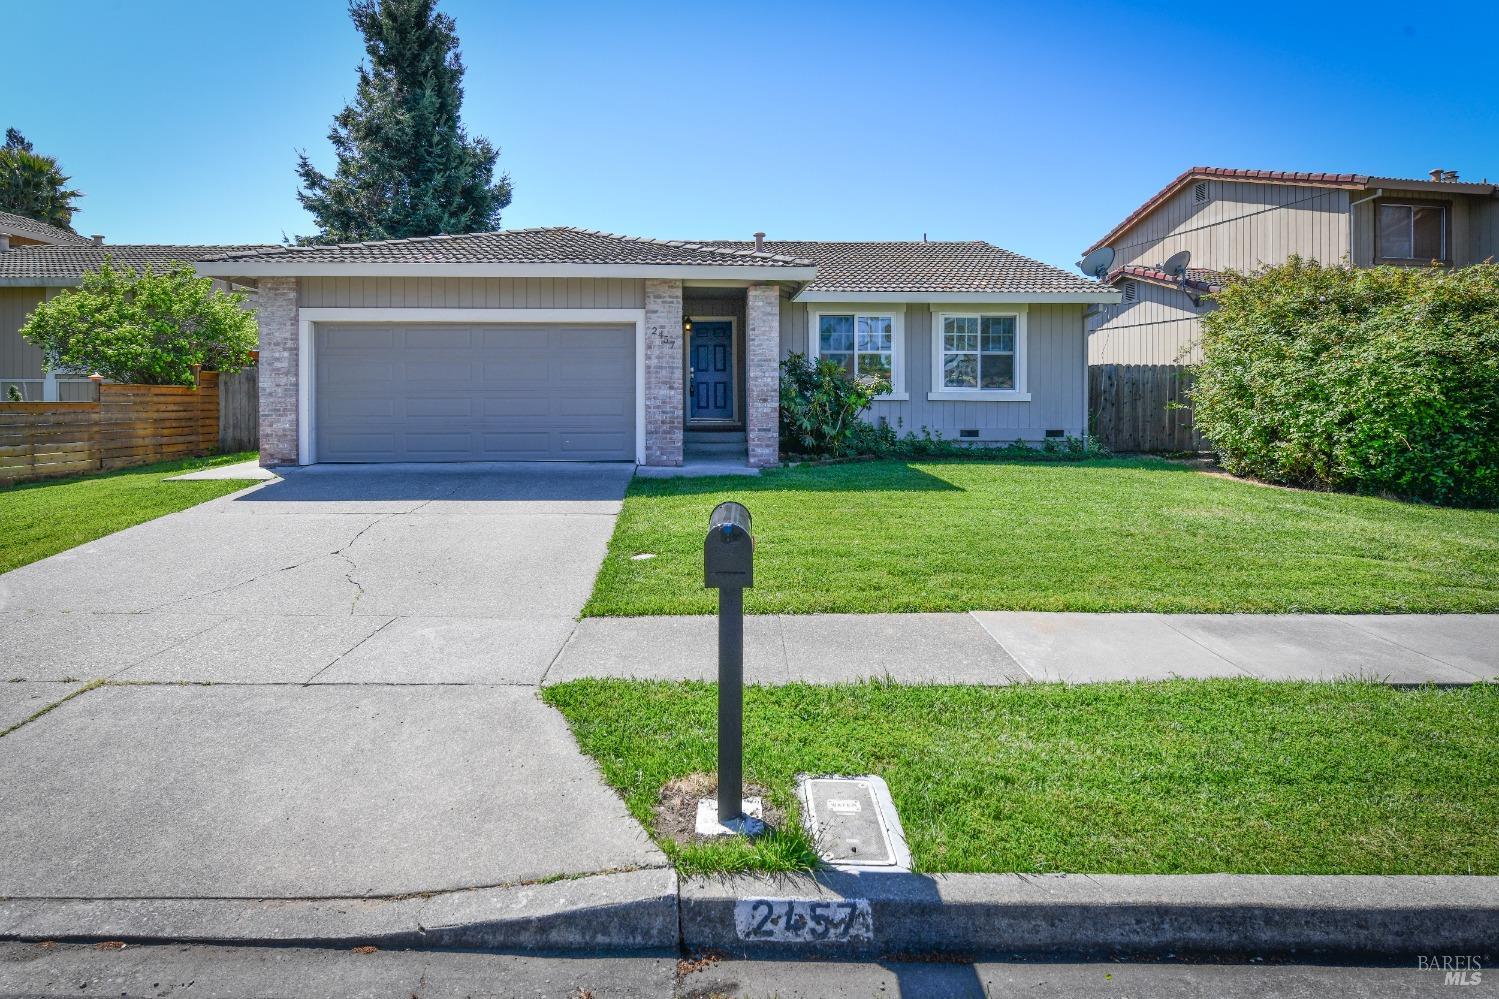 Photo of 2457 Carriage Pl in Napa, CA